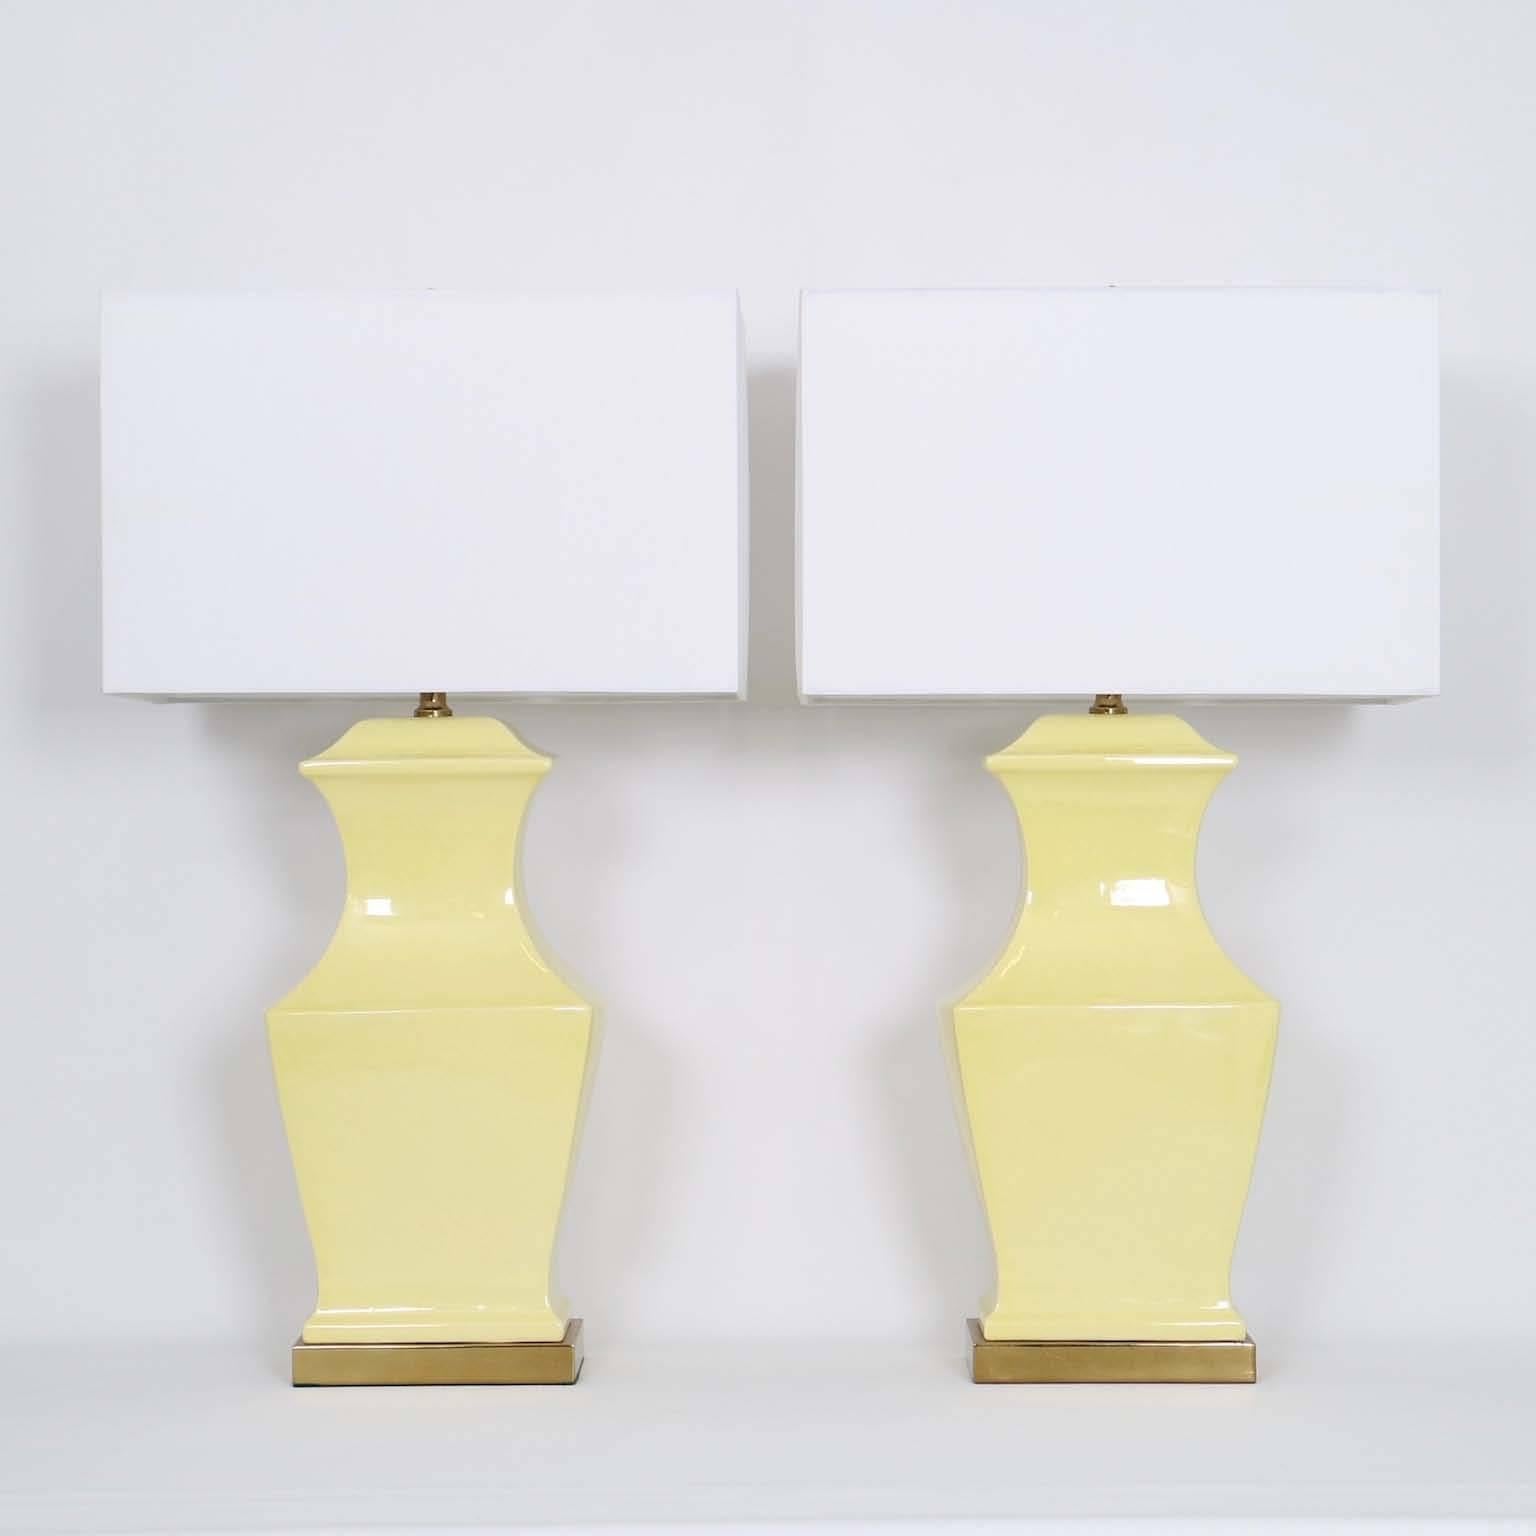 Pair of ceramic squared baluster lamps by Paul Hanson, mounted on brass bases. The noted height is to the finial; the height of the ceramic body is 17 in (43 cm). Very good vintage condition, wear is consistent with age and use. Newly